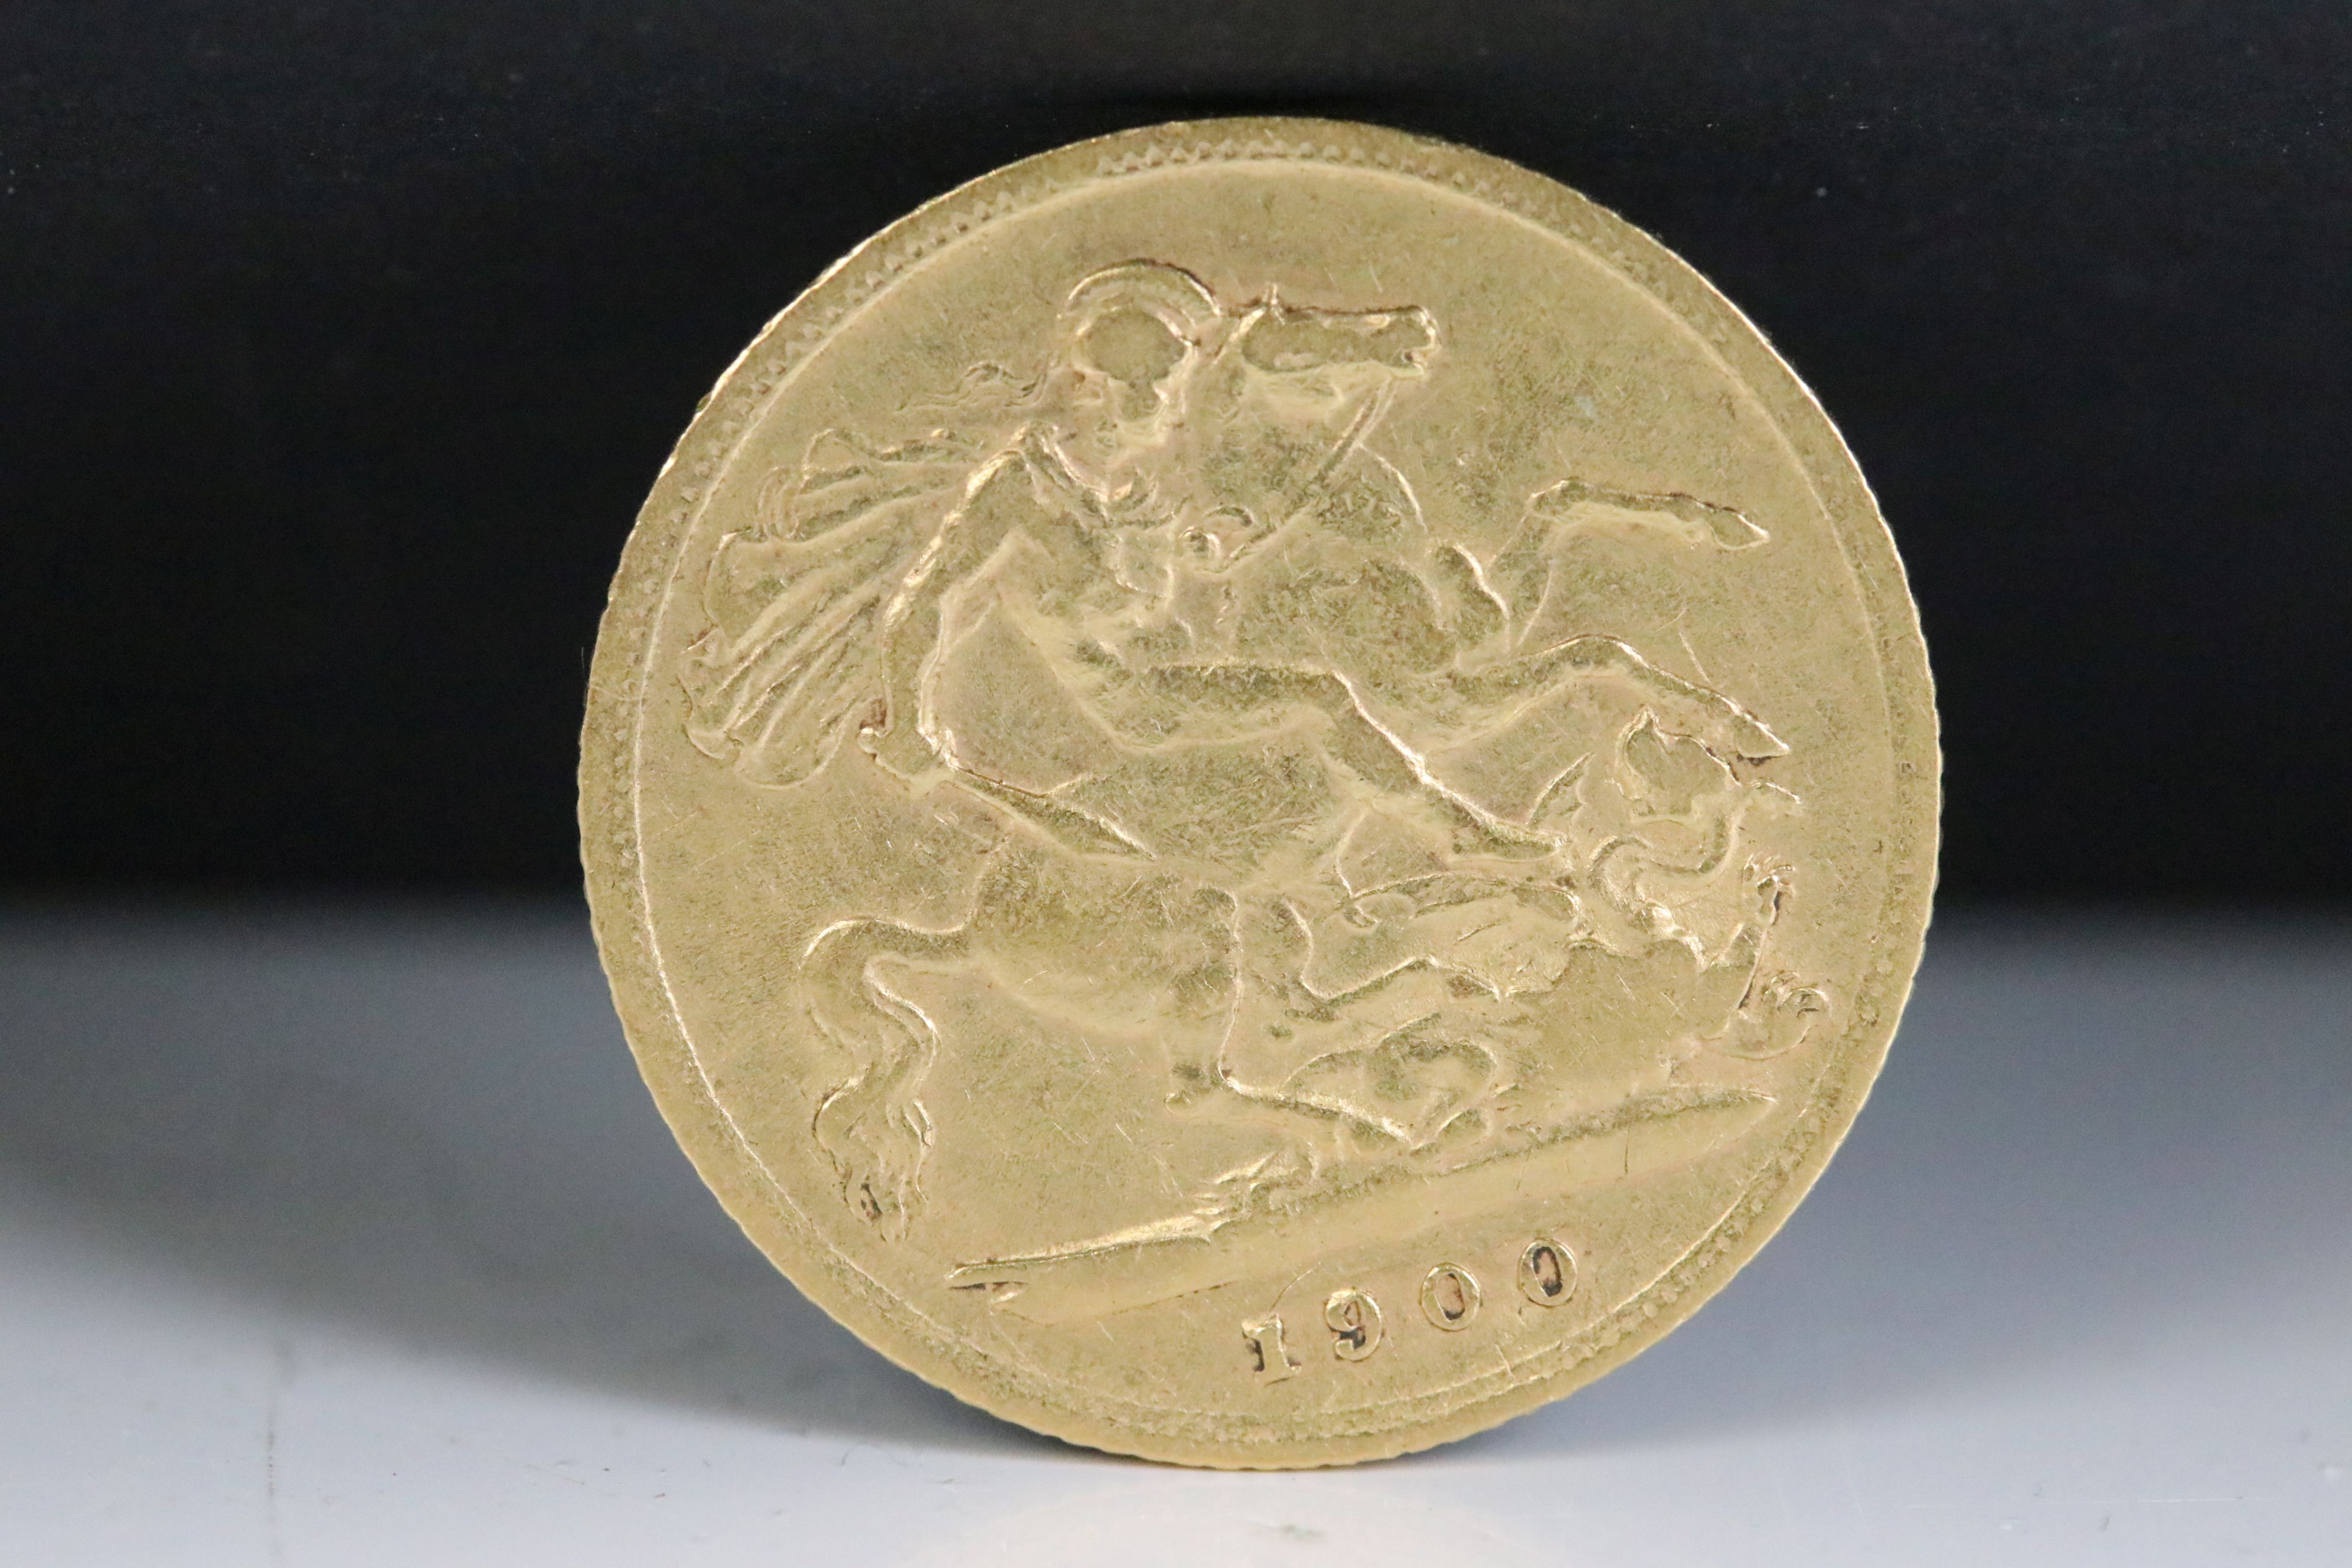 A British Queen Victoria gold half sovereign coin, dated 1900.